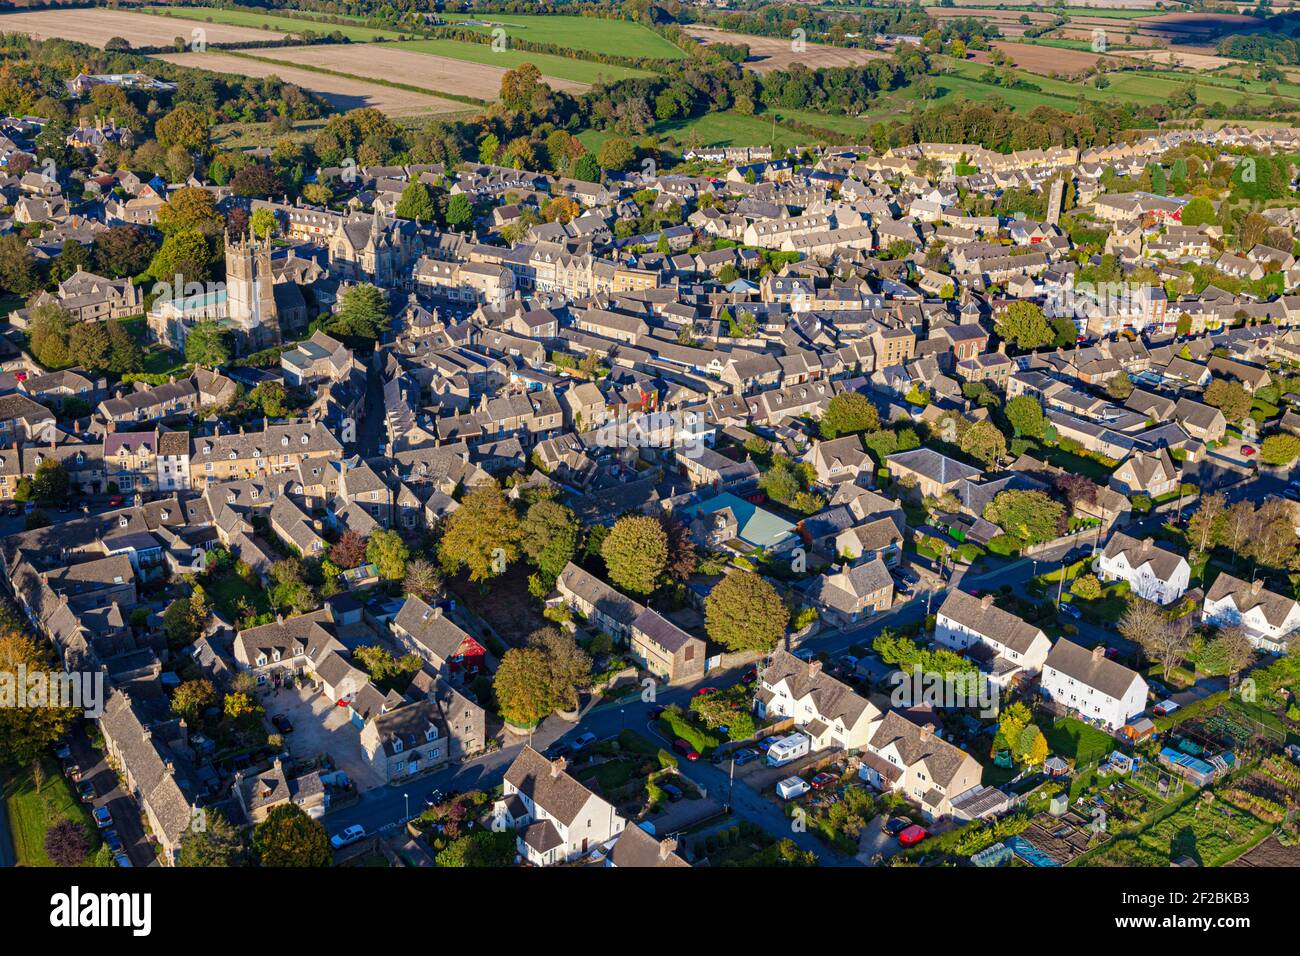 An aerial view of the Cotswold town of Stow on the Wold, Gloucestershire, UK Stock Photo